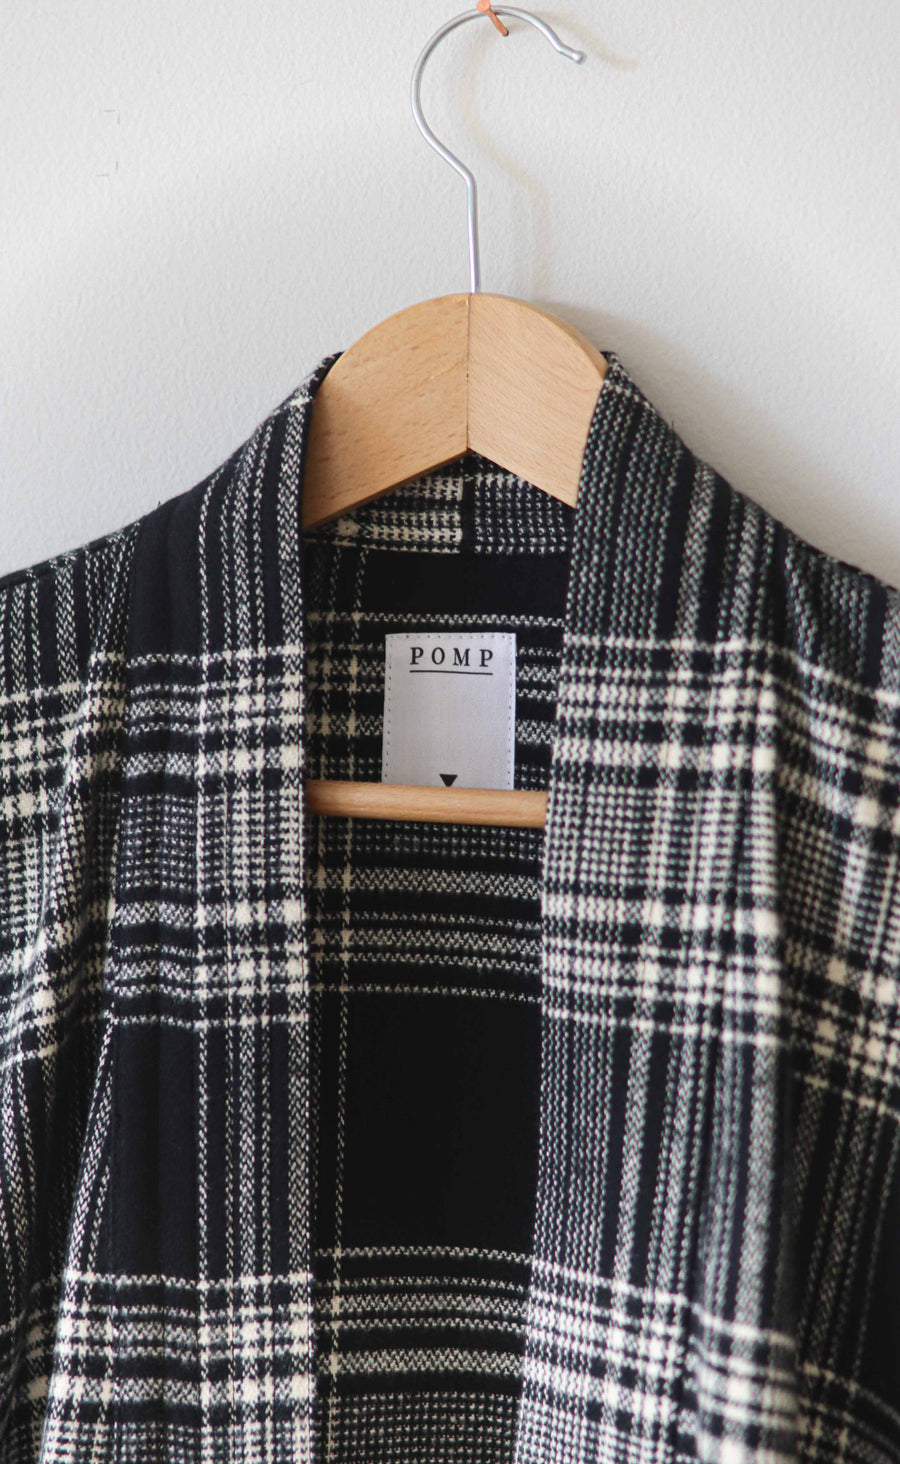 The Renegade - Long Sleeve Duster Coat - Heavy Flannel